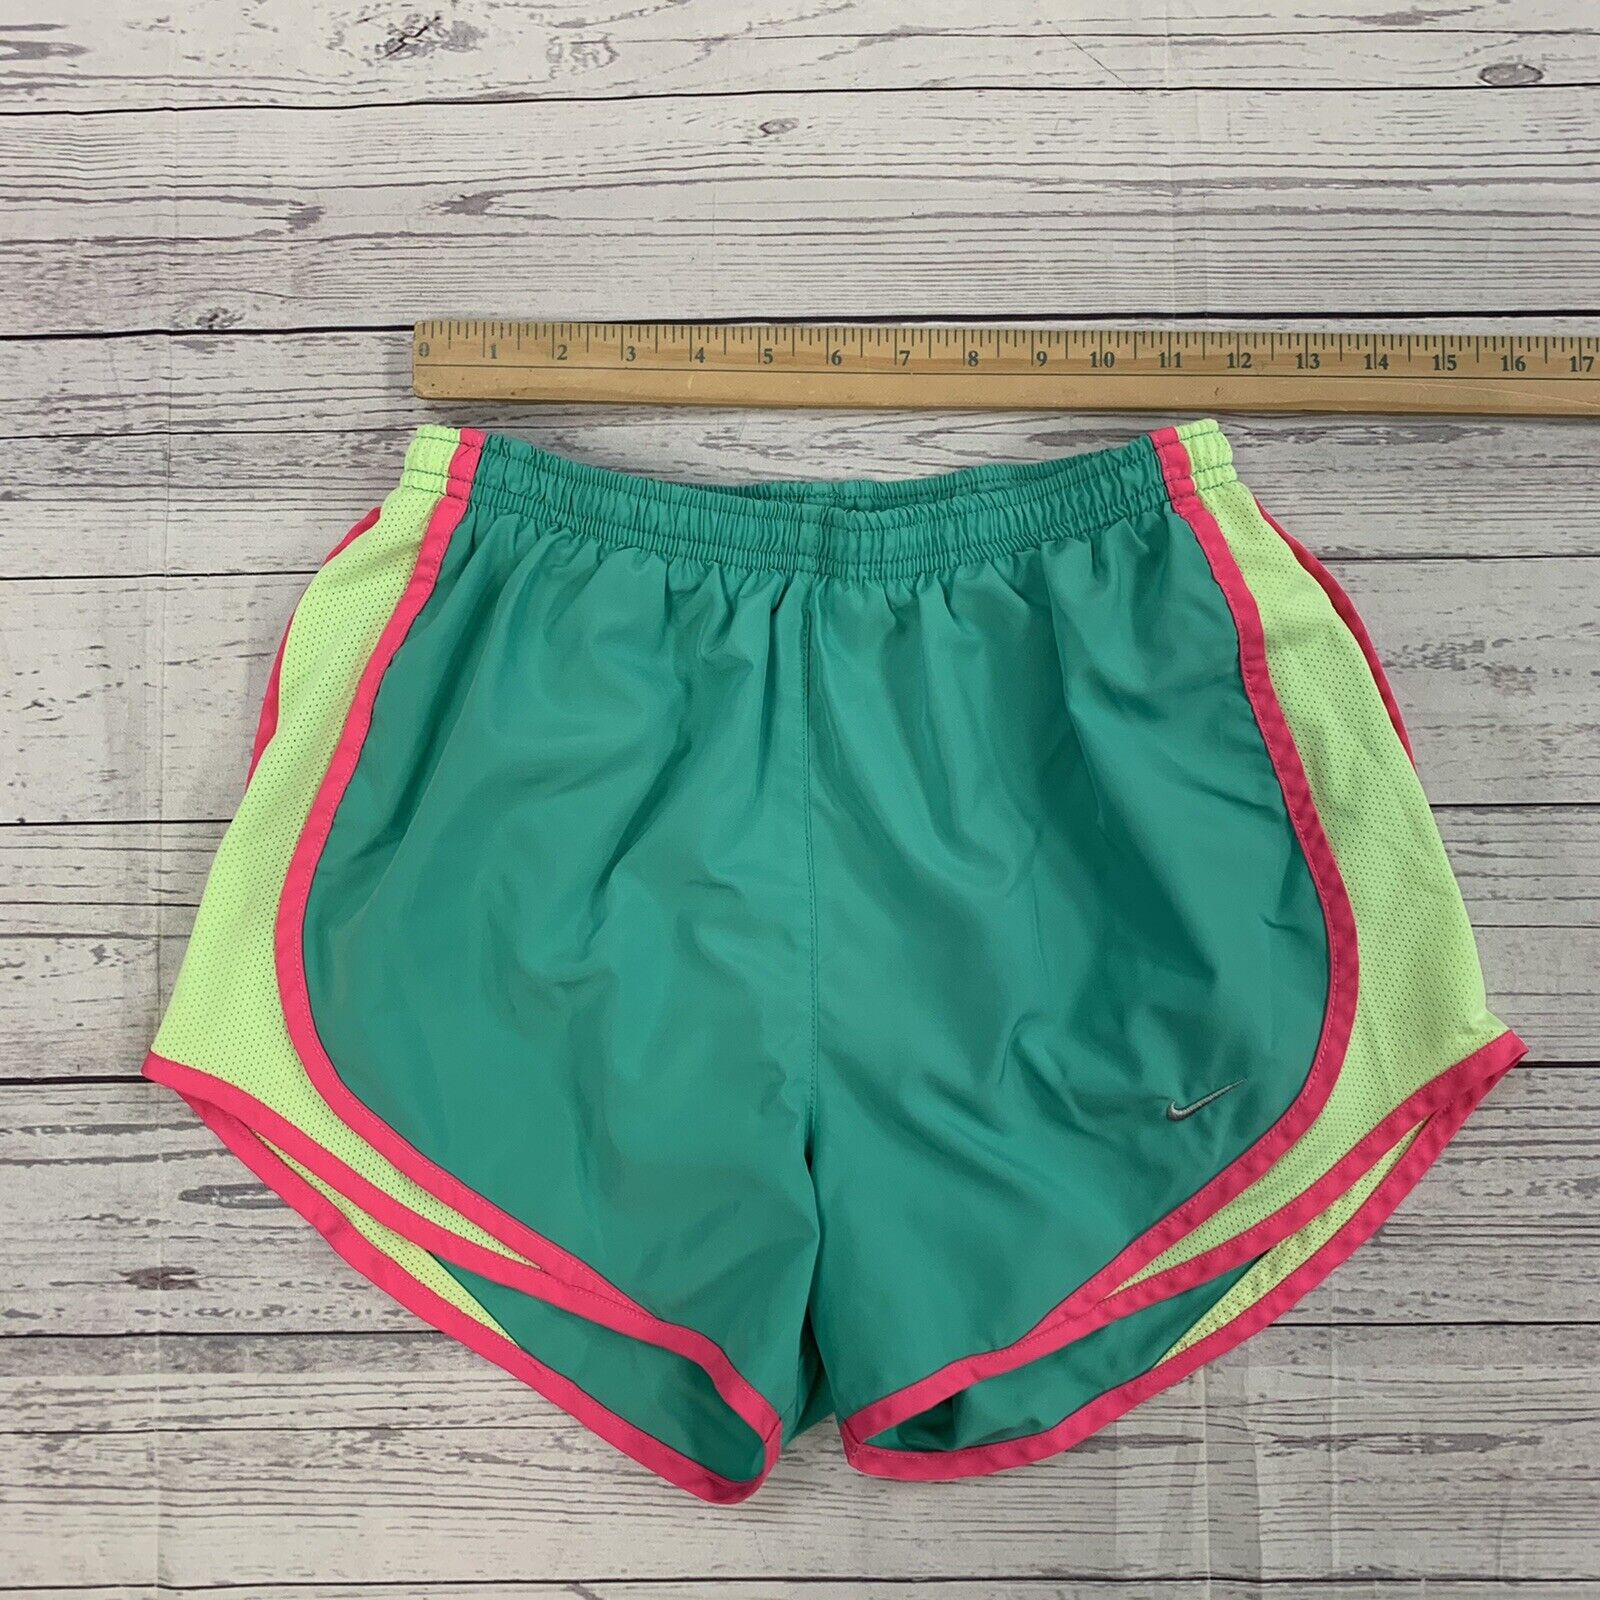 Nike Dri Fit Womens green/pink Athletic Shorts size small - beyond exchange